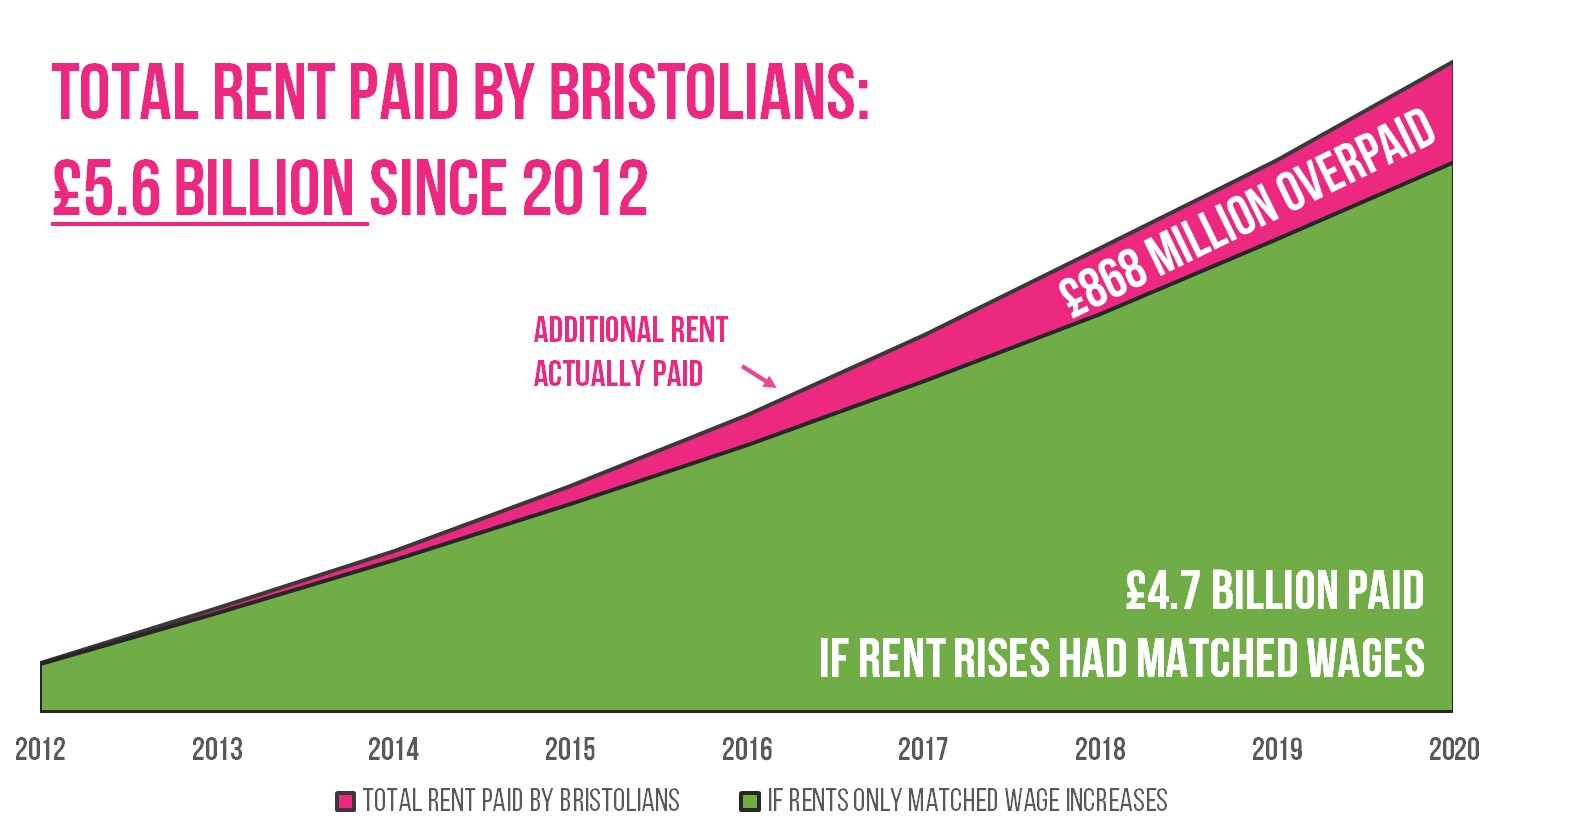 Chart showing £868 million in excess rent paid by Bristolians since 2012, compared with if rent rises had matched wage increases